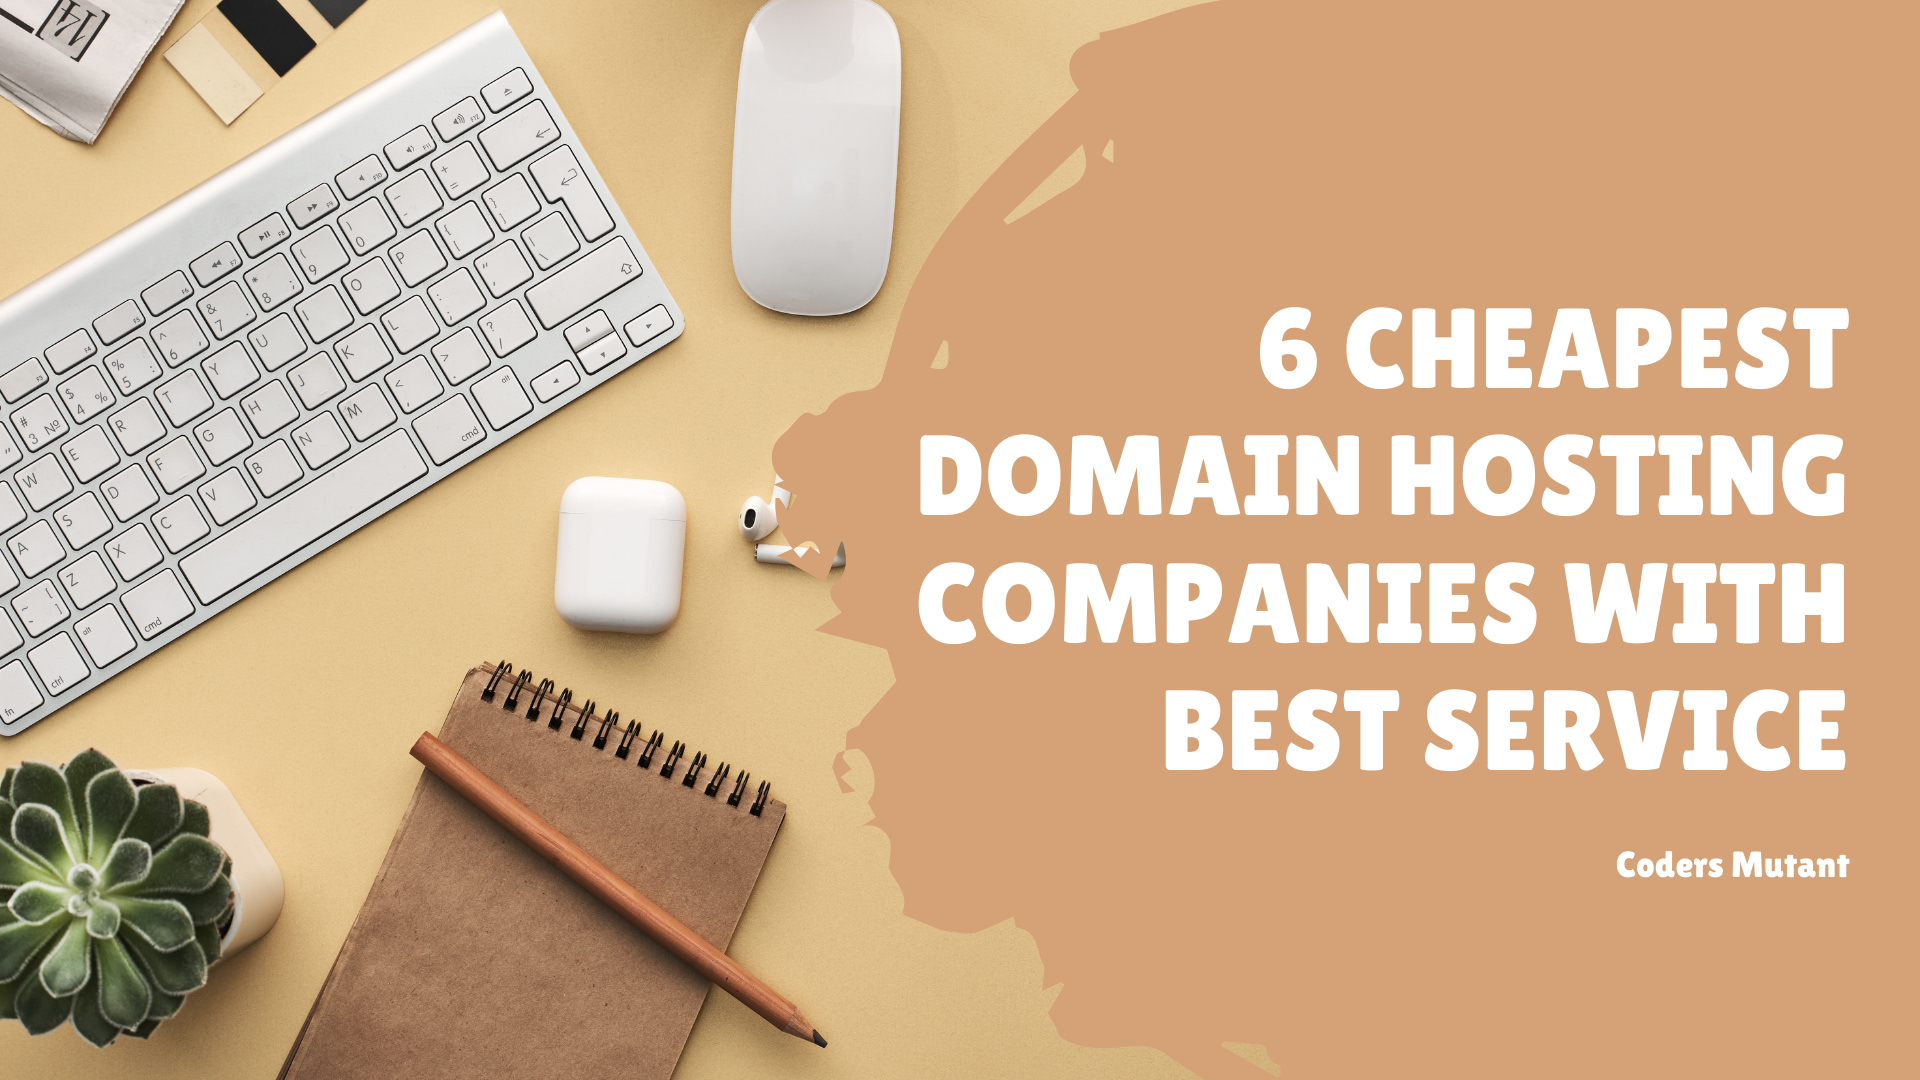 6 cheapest domain hosting companies with best service